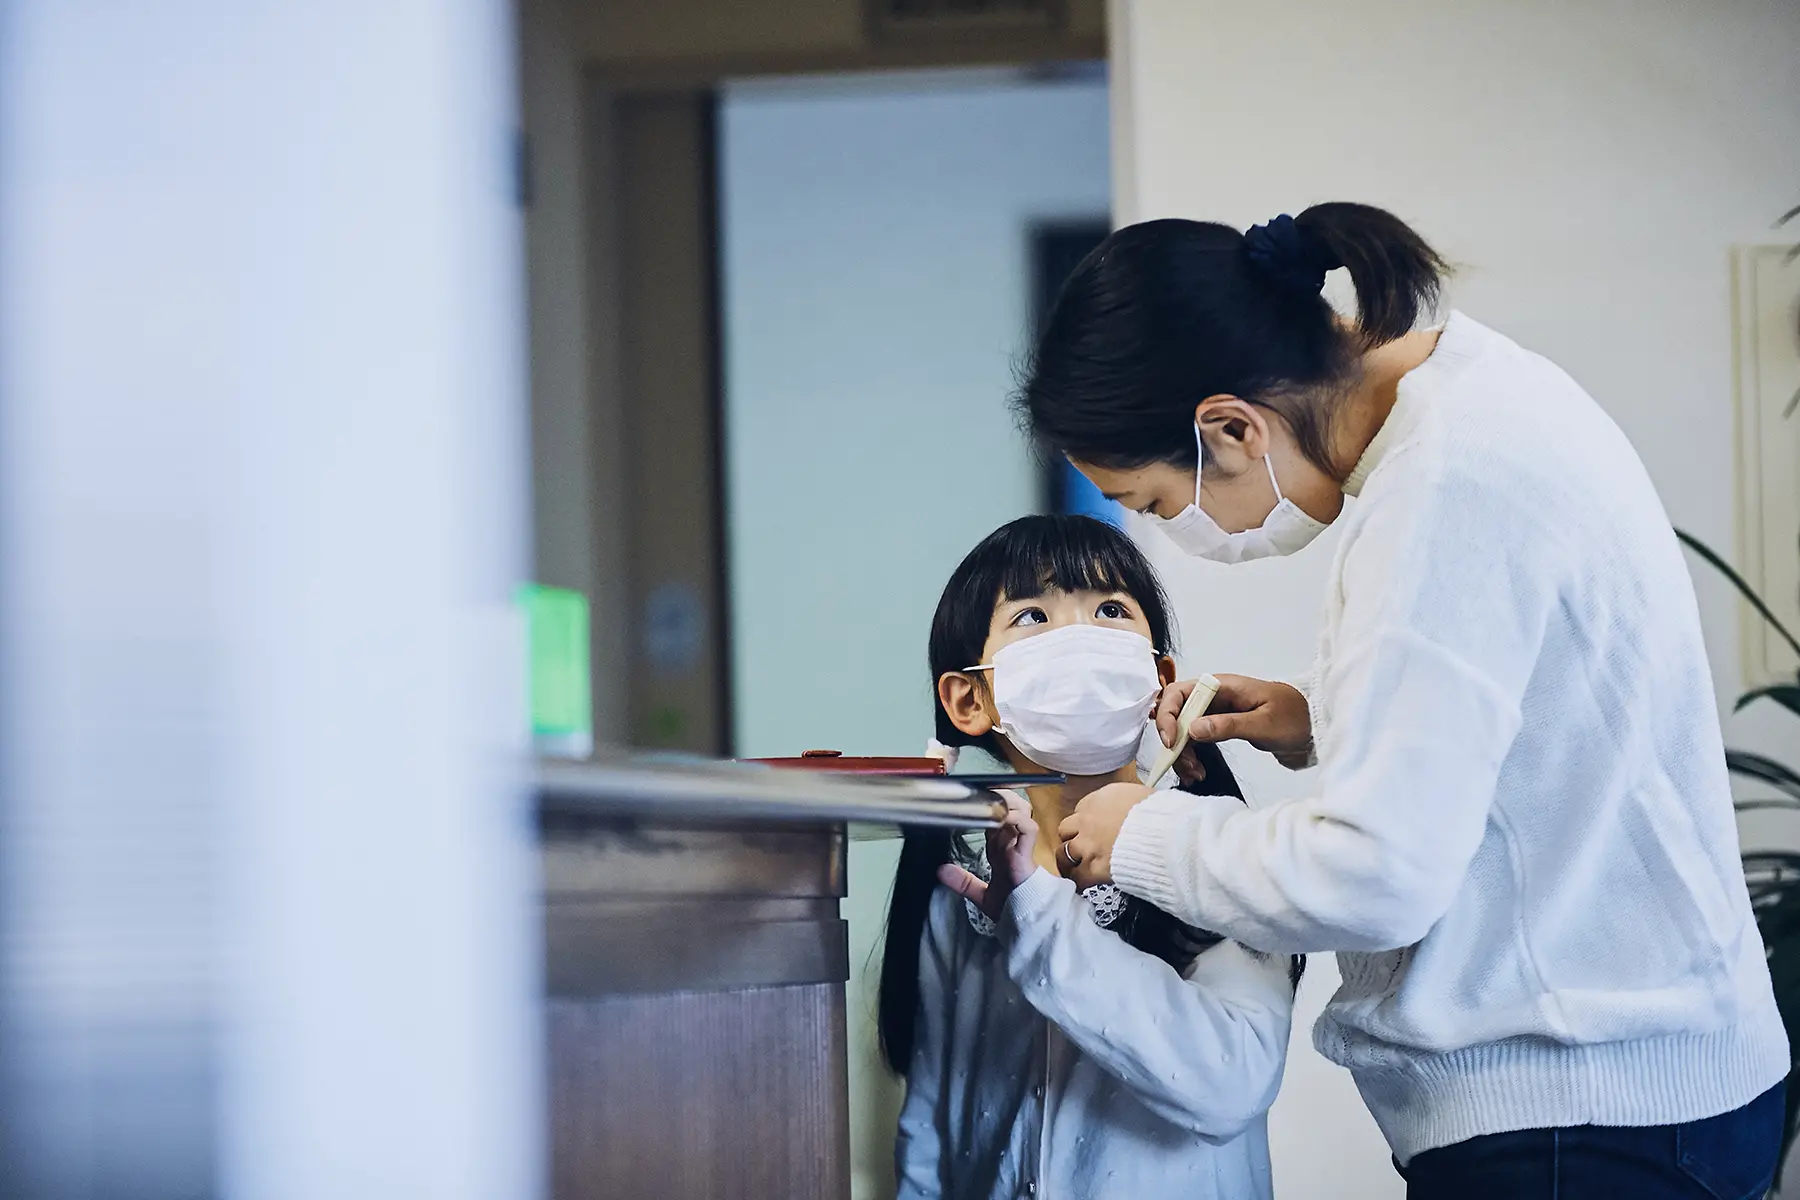 A child and her parent at the hospital reception